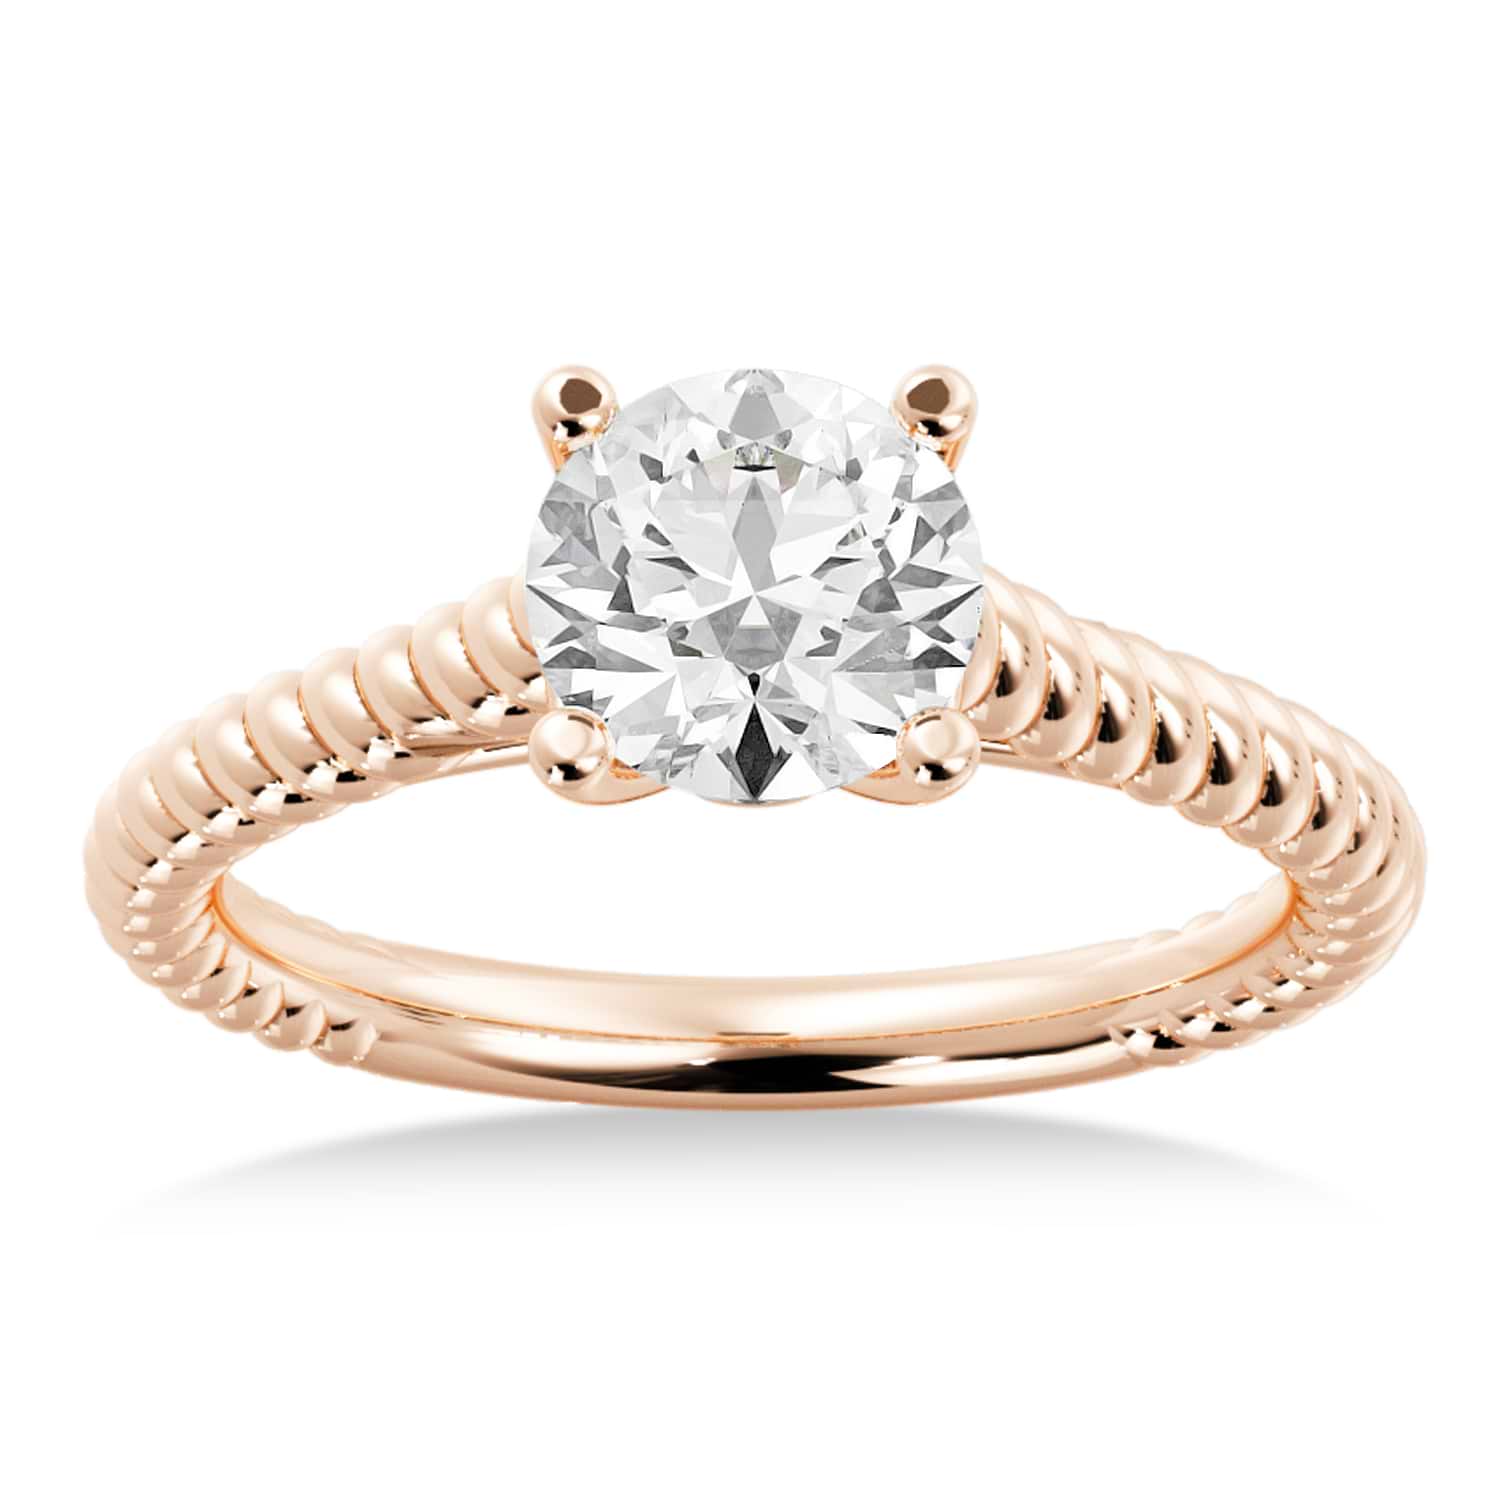 Twisted Rope Solitaire Engagement Ring 14k Rose Gold